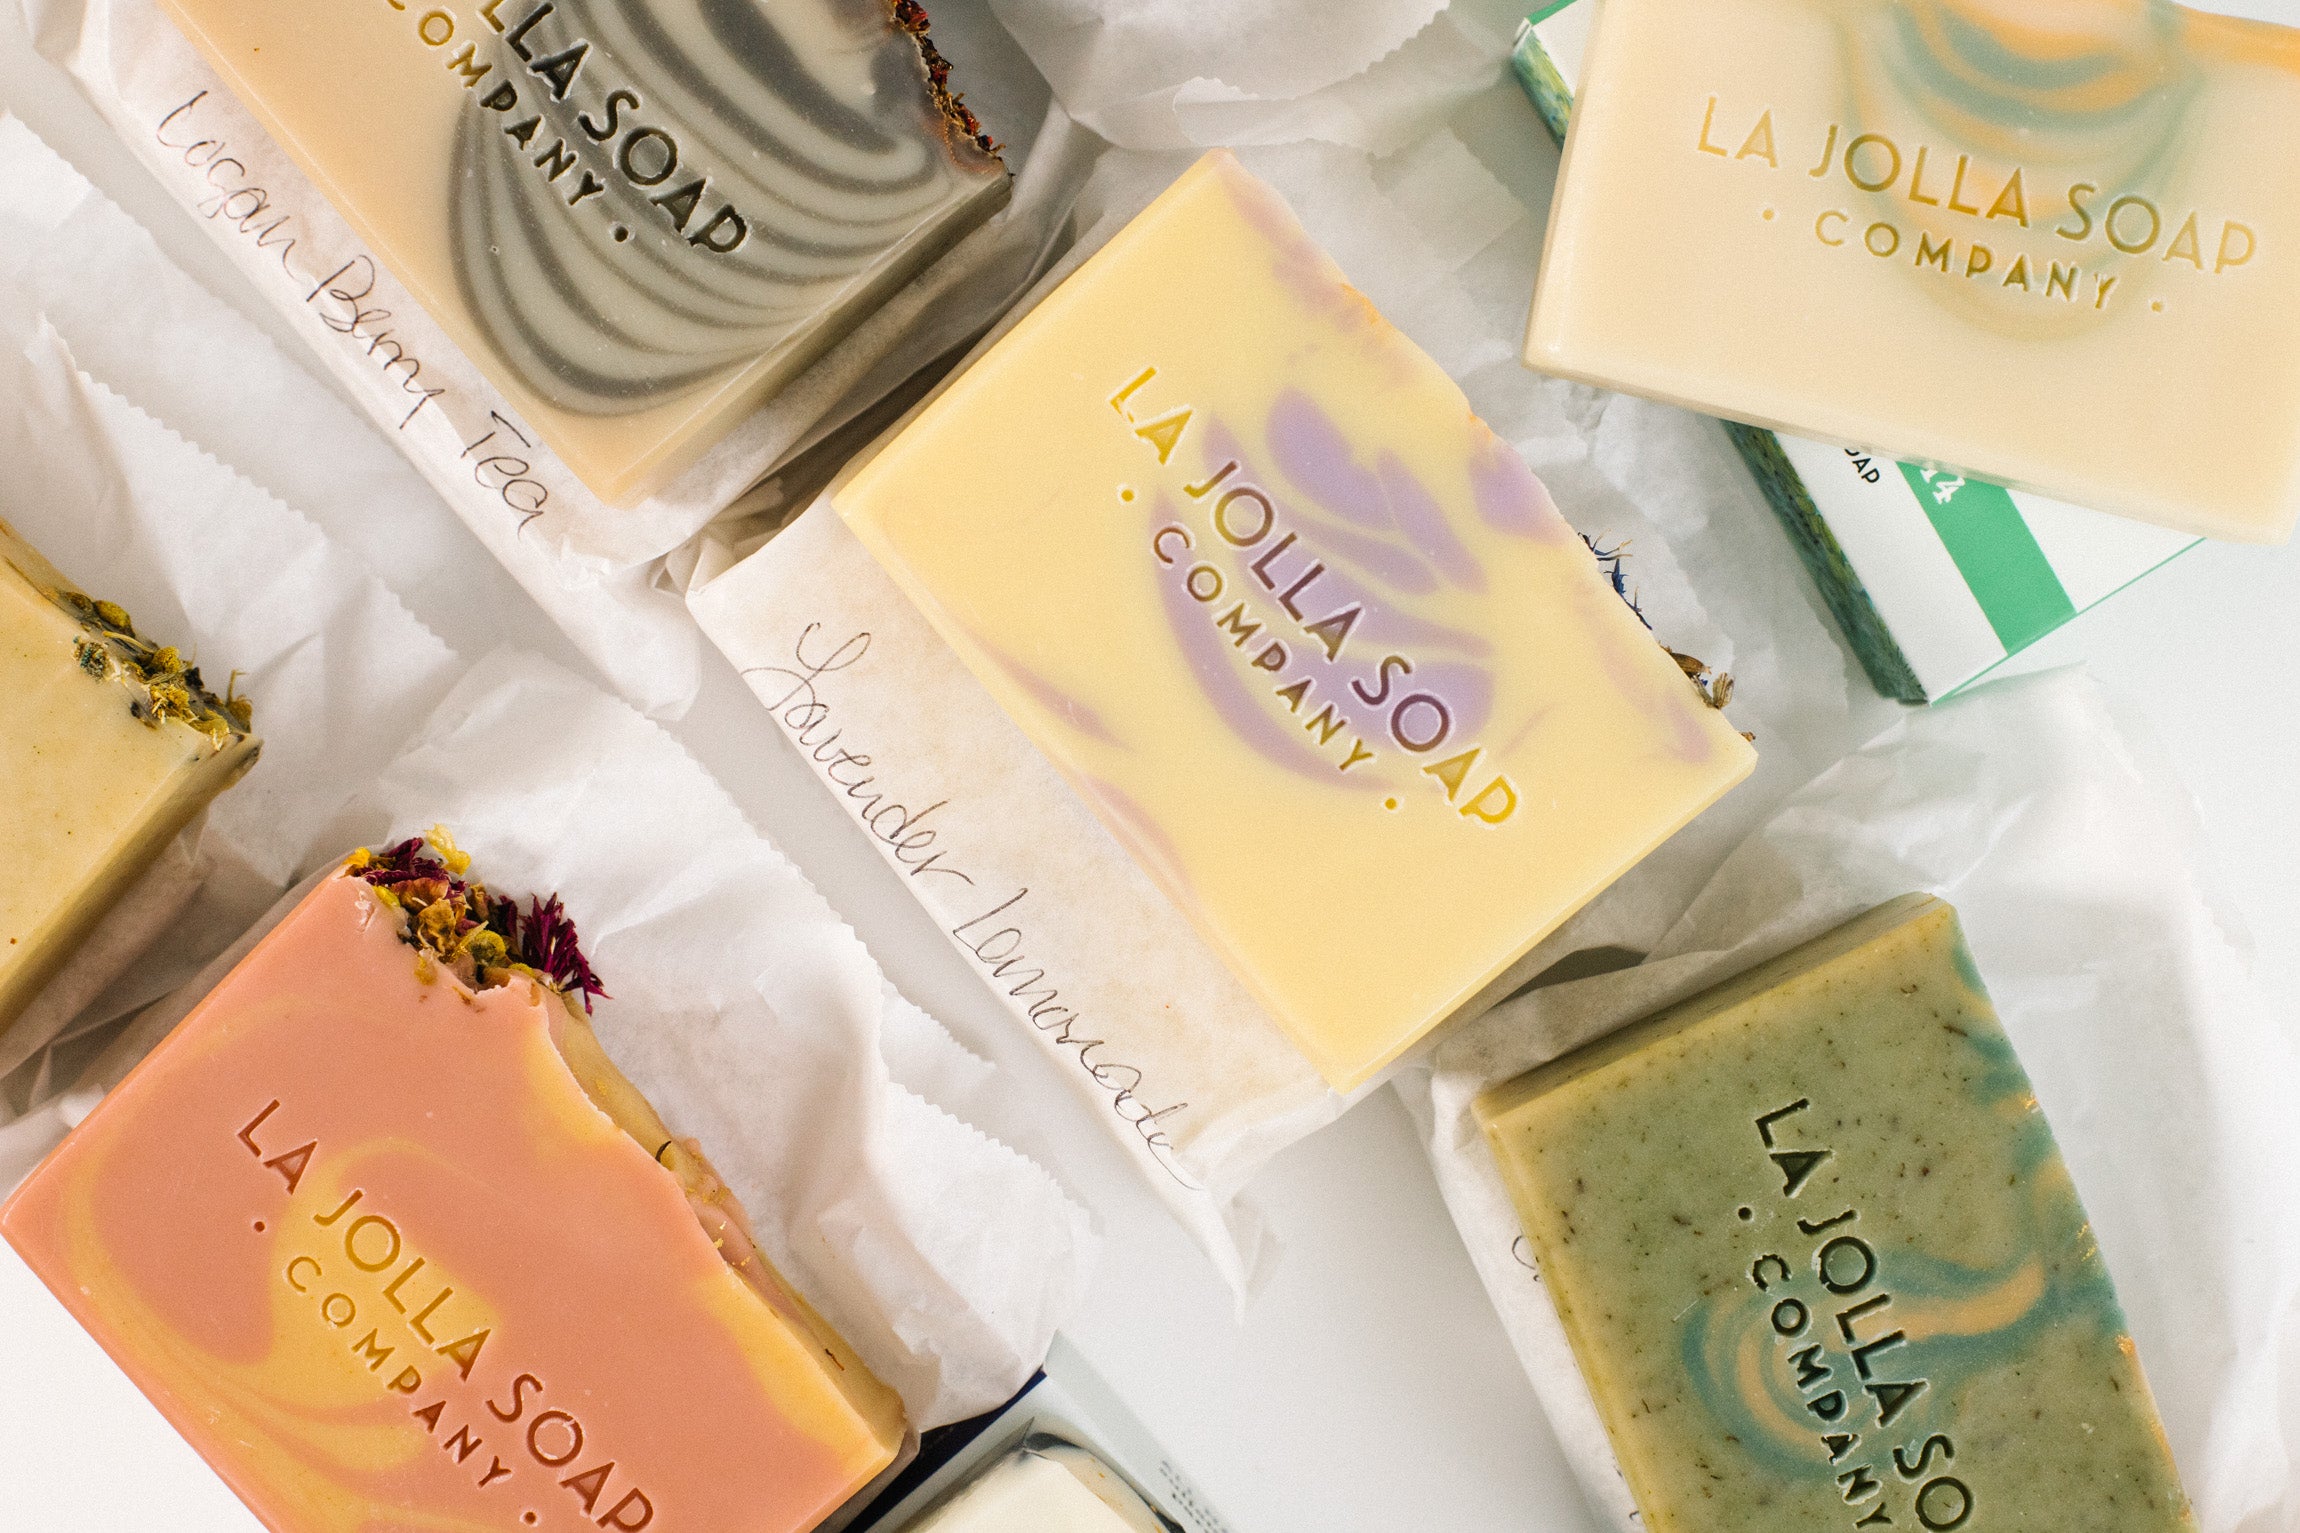 Why Artisan Soap?